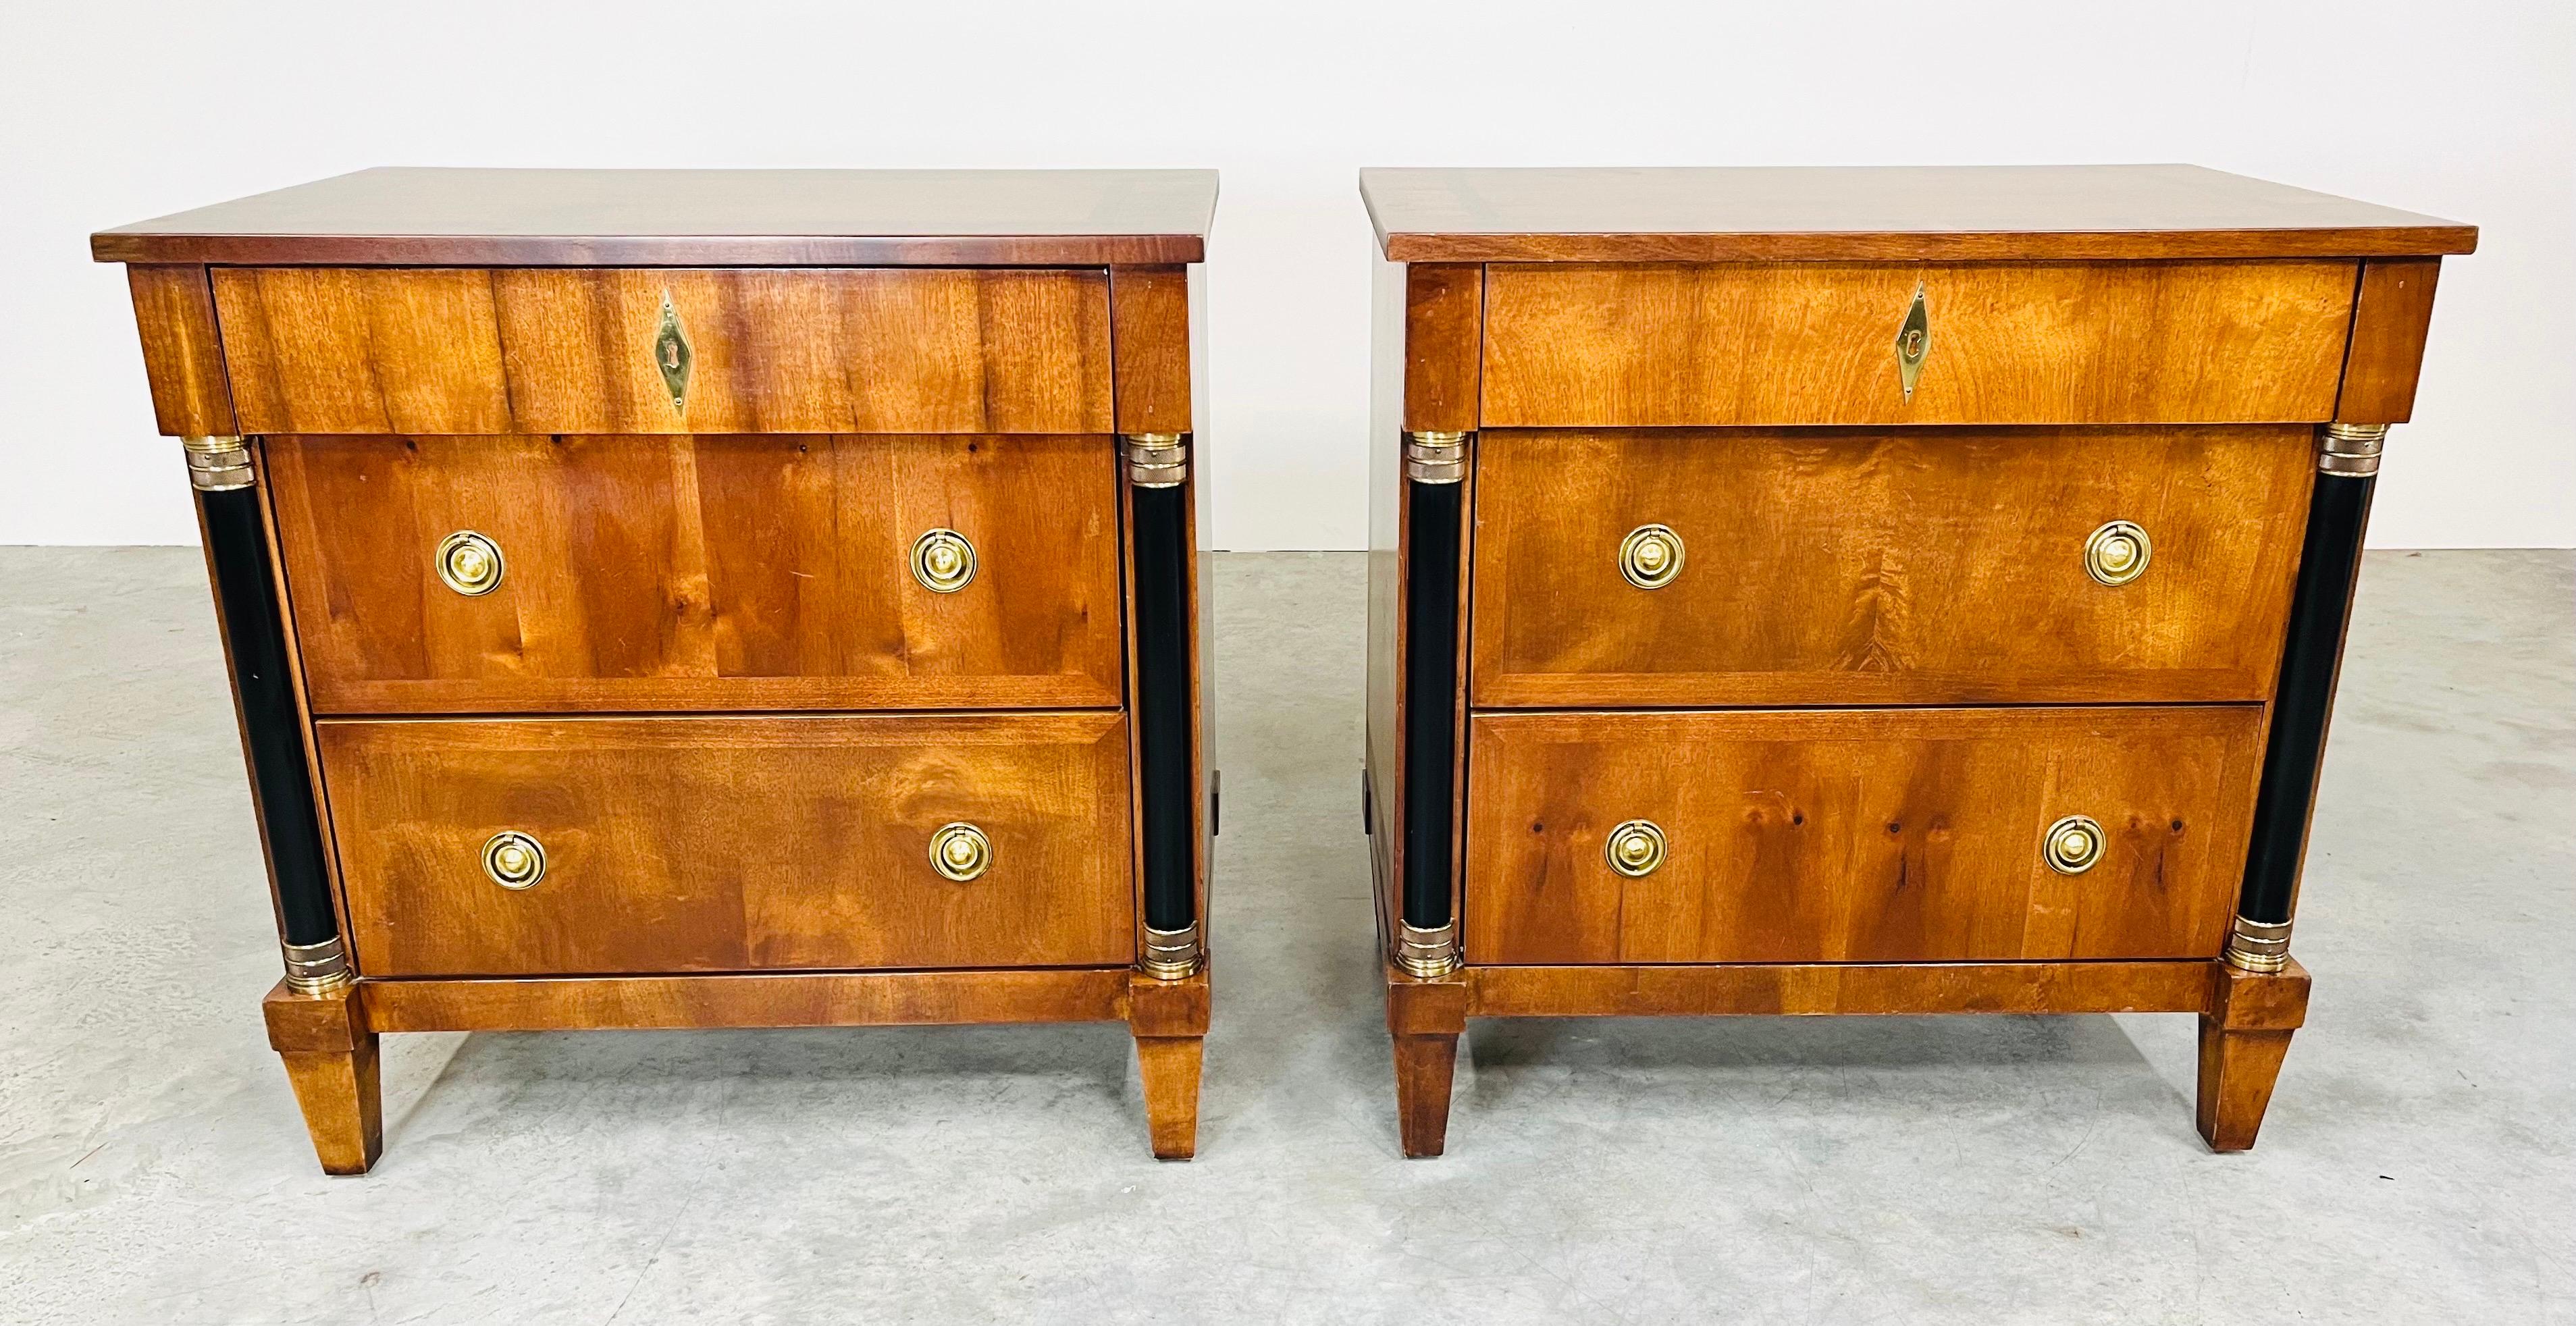 A sophisticated pair of Century Furniture Biedermeier style nightstands from “The Capuan Collection,” designed by acclaimed designer, Raymond K. Sobota (1914-2010)
Dovetail constructed drawers with original brass drawer pulls . Two Neoclassical